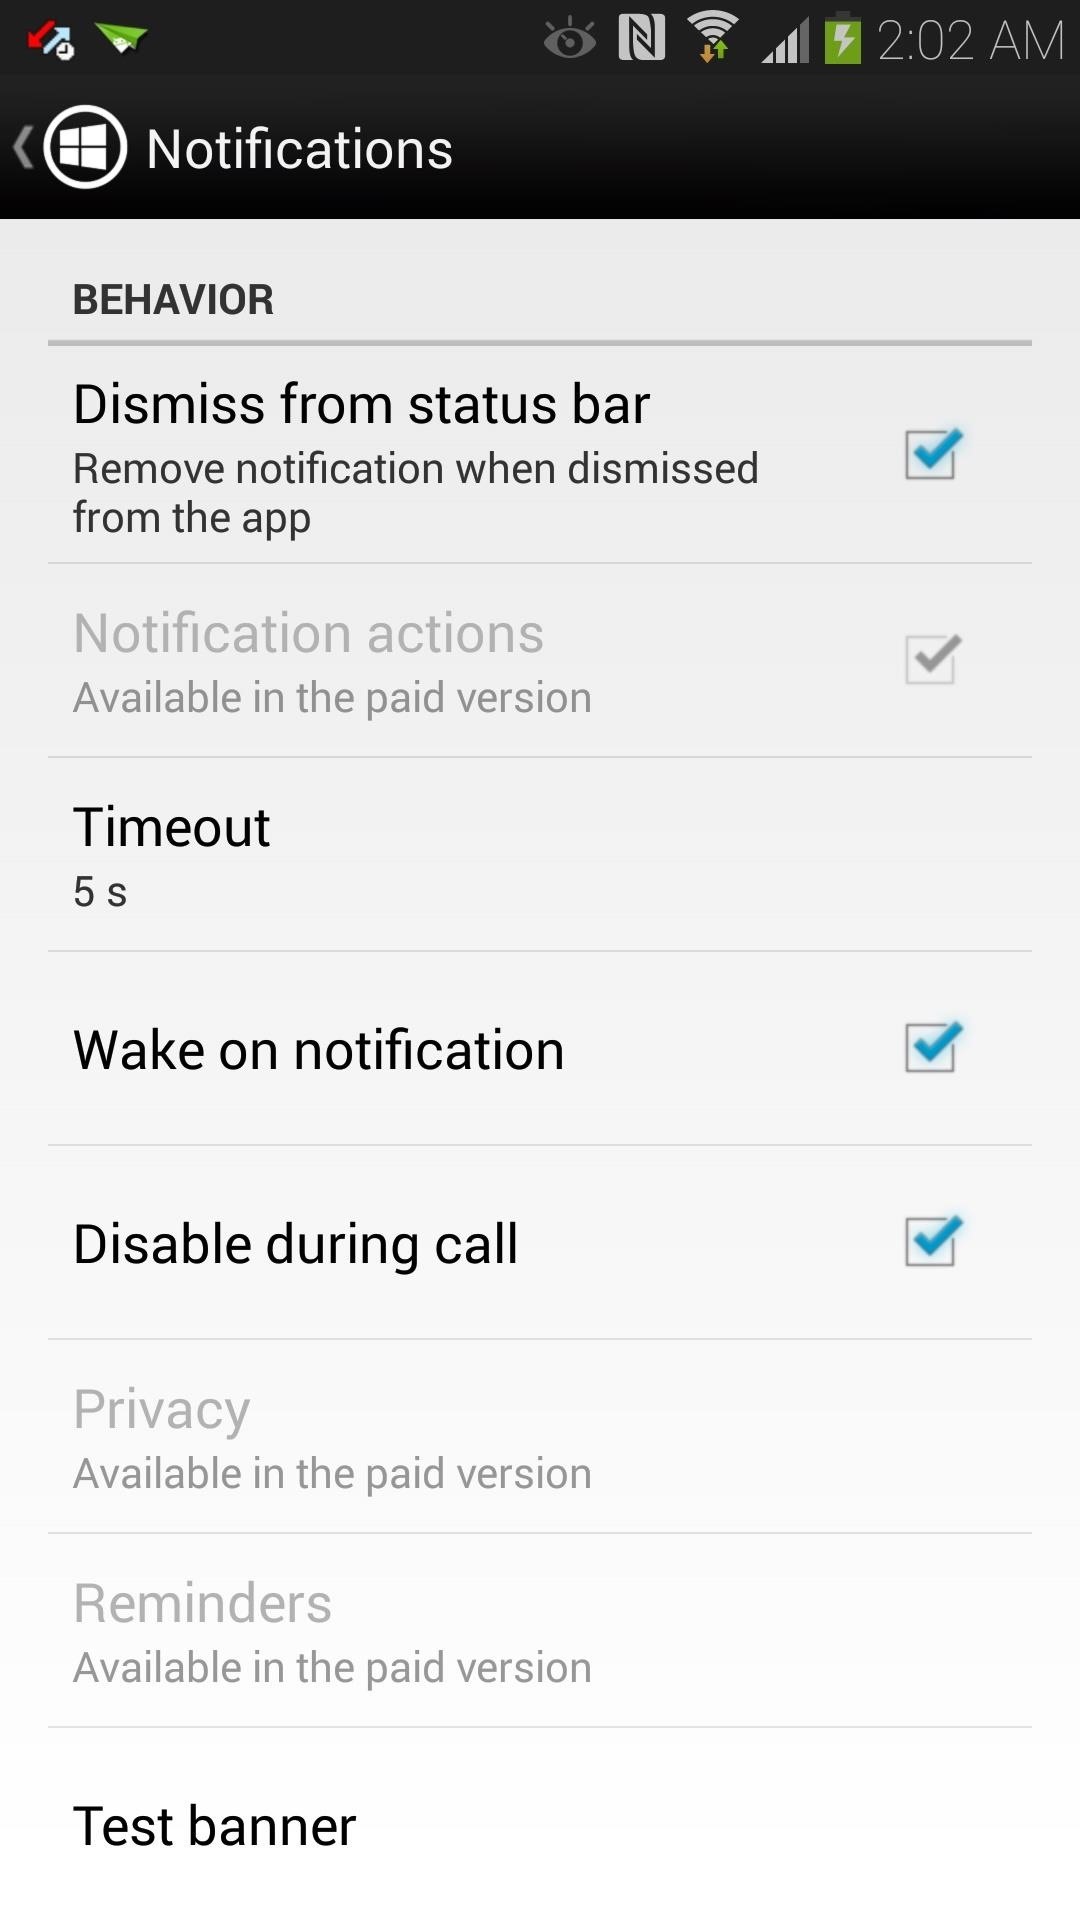 How to Get Windows Phone-Style Notifications on Your Samsung Galaxy S4